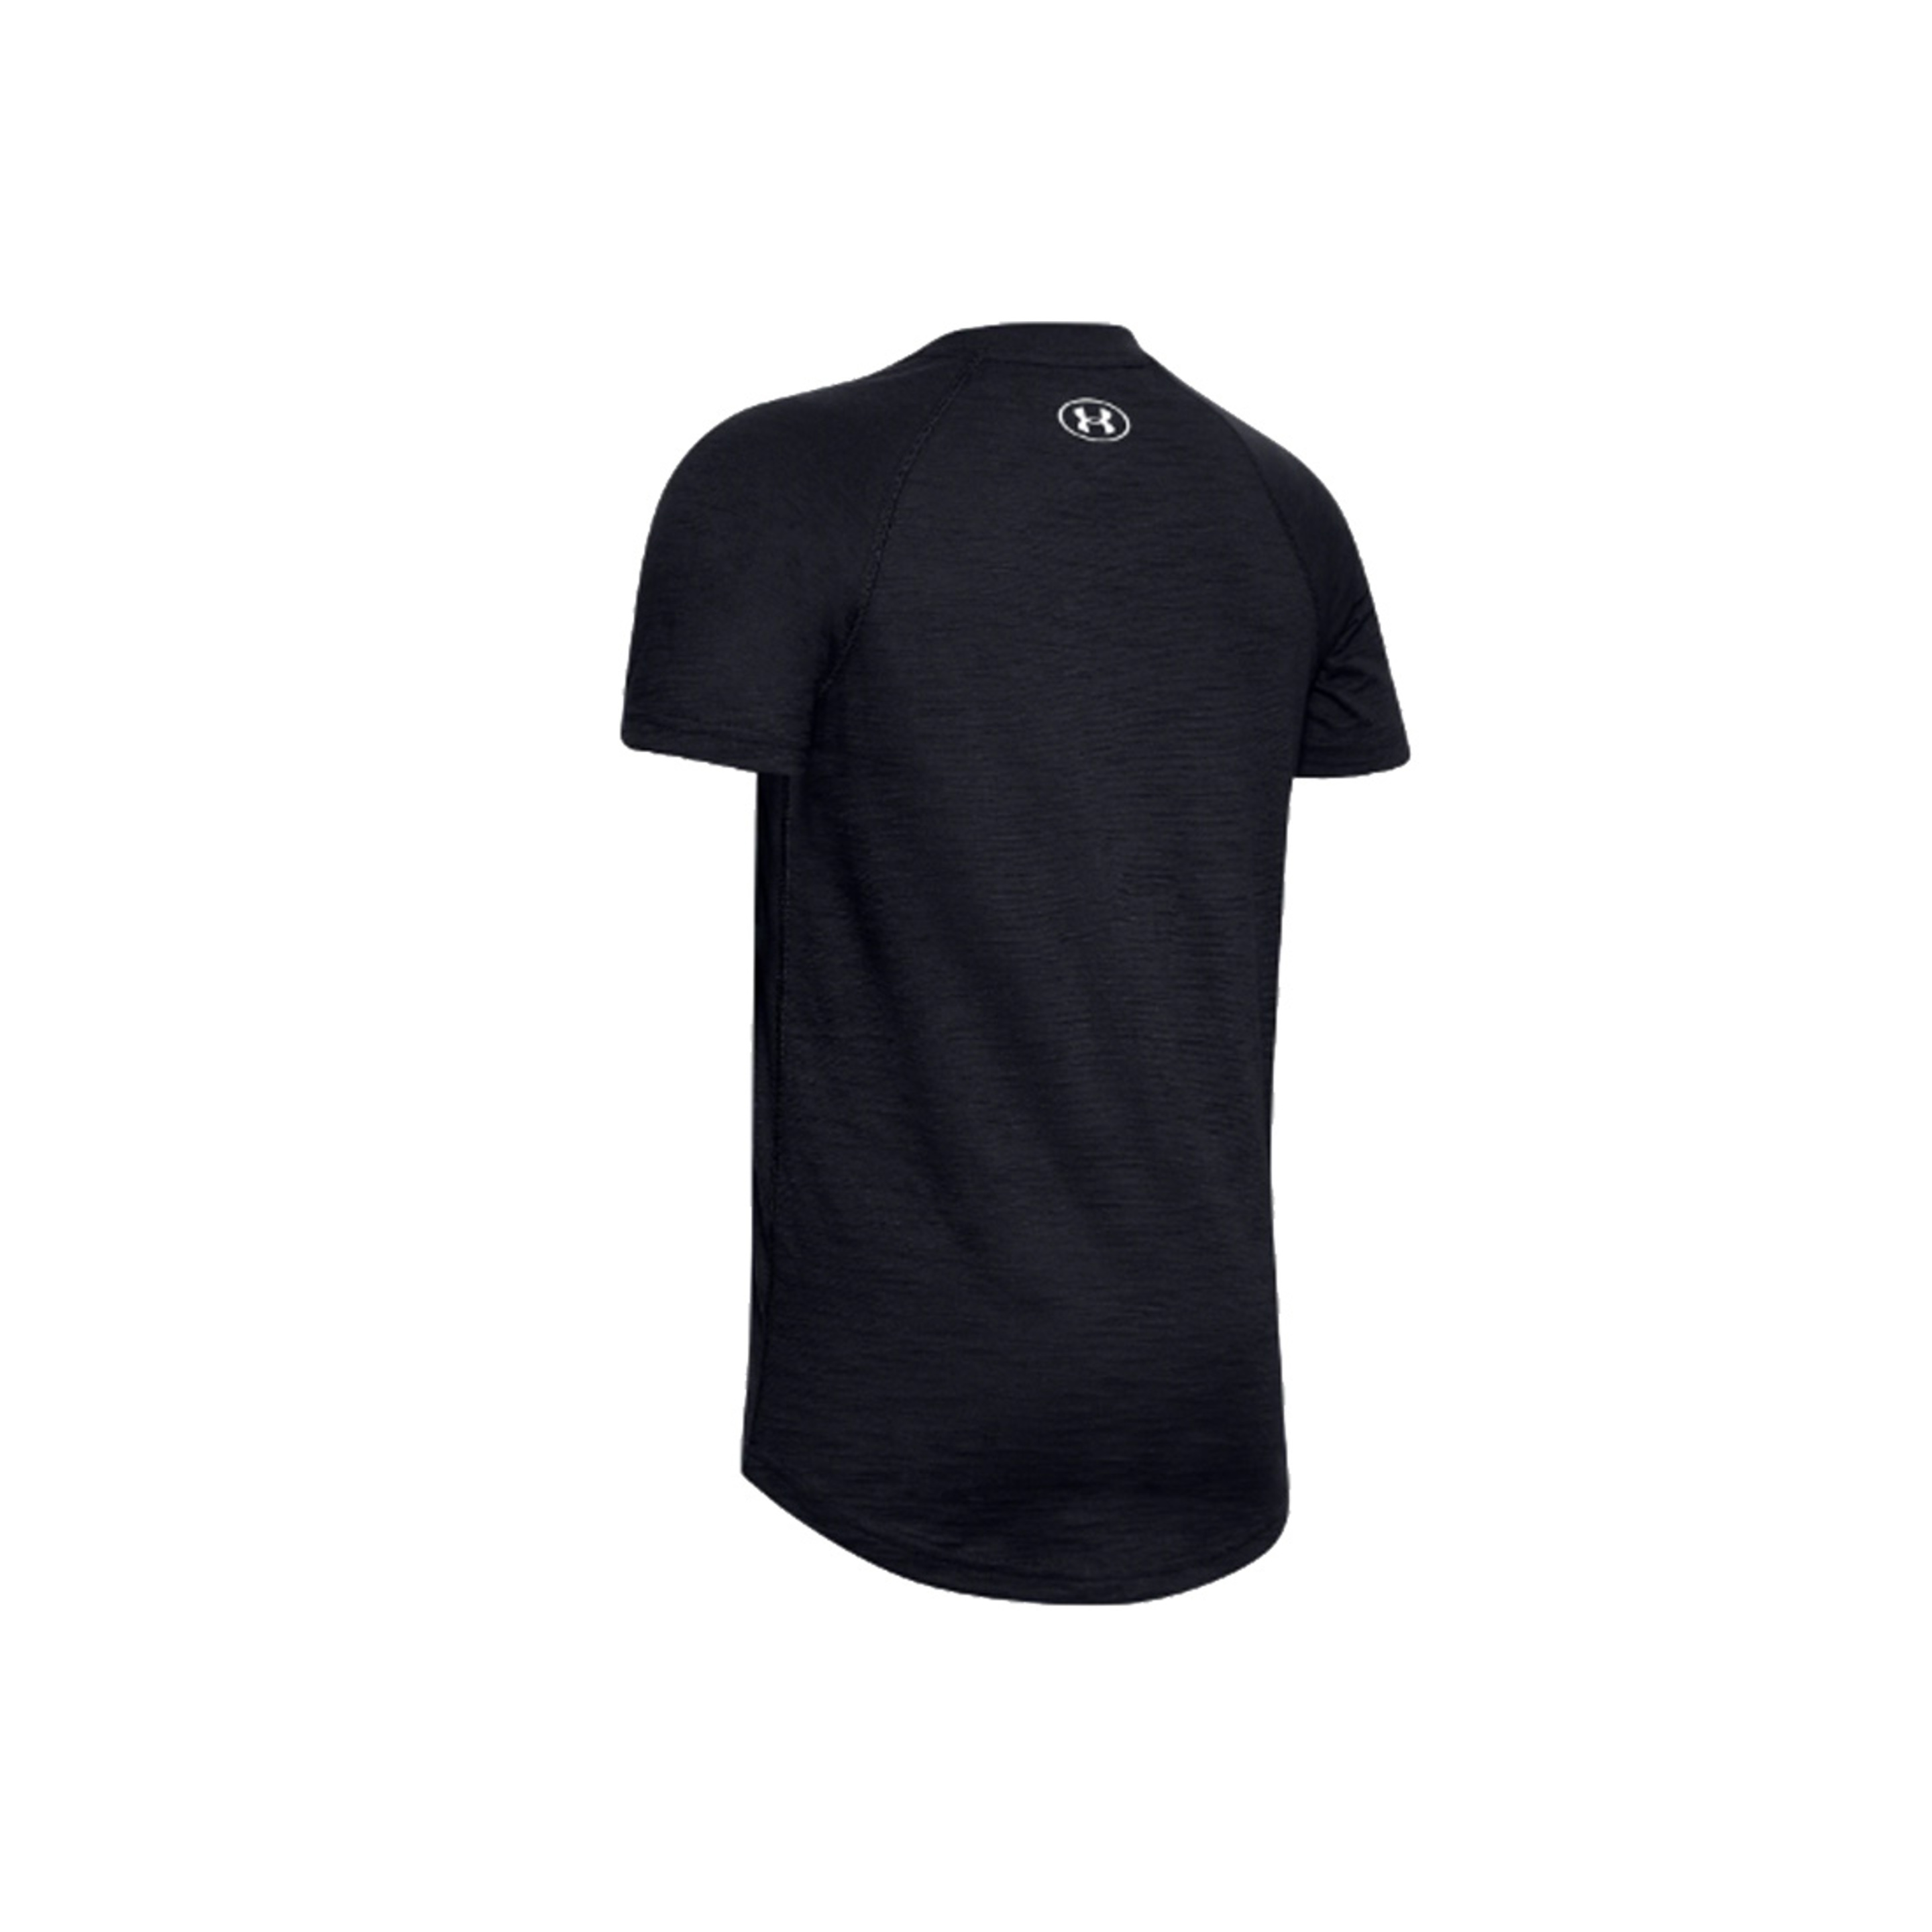 Under Armour Charged Cotton Ss Jr Tee 1351832-001